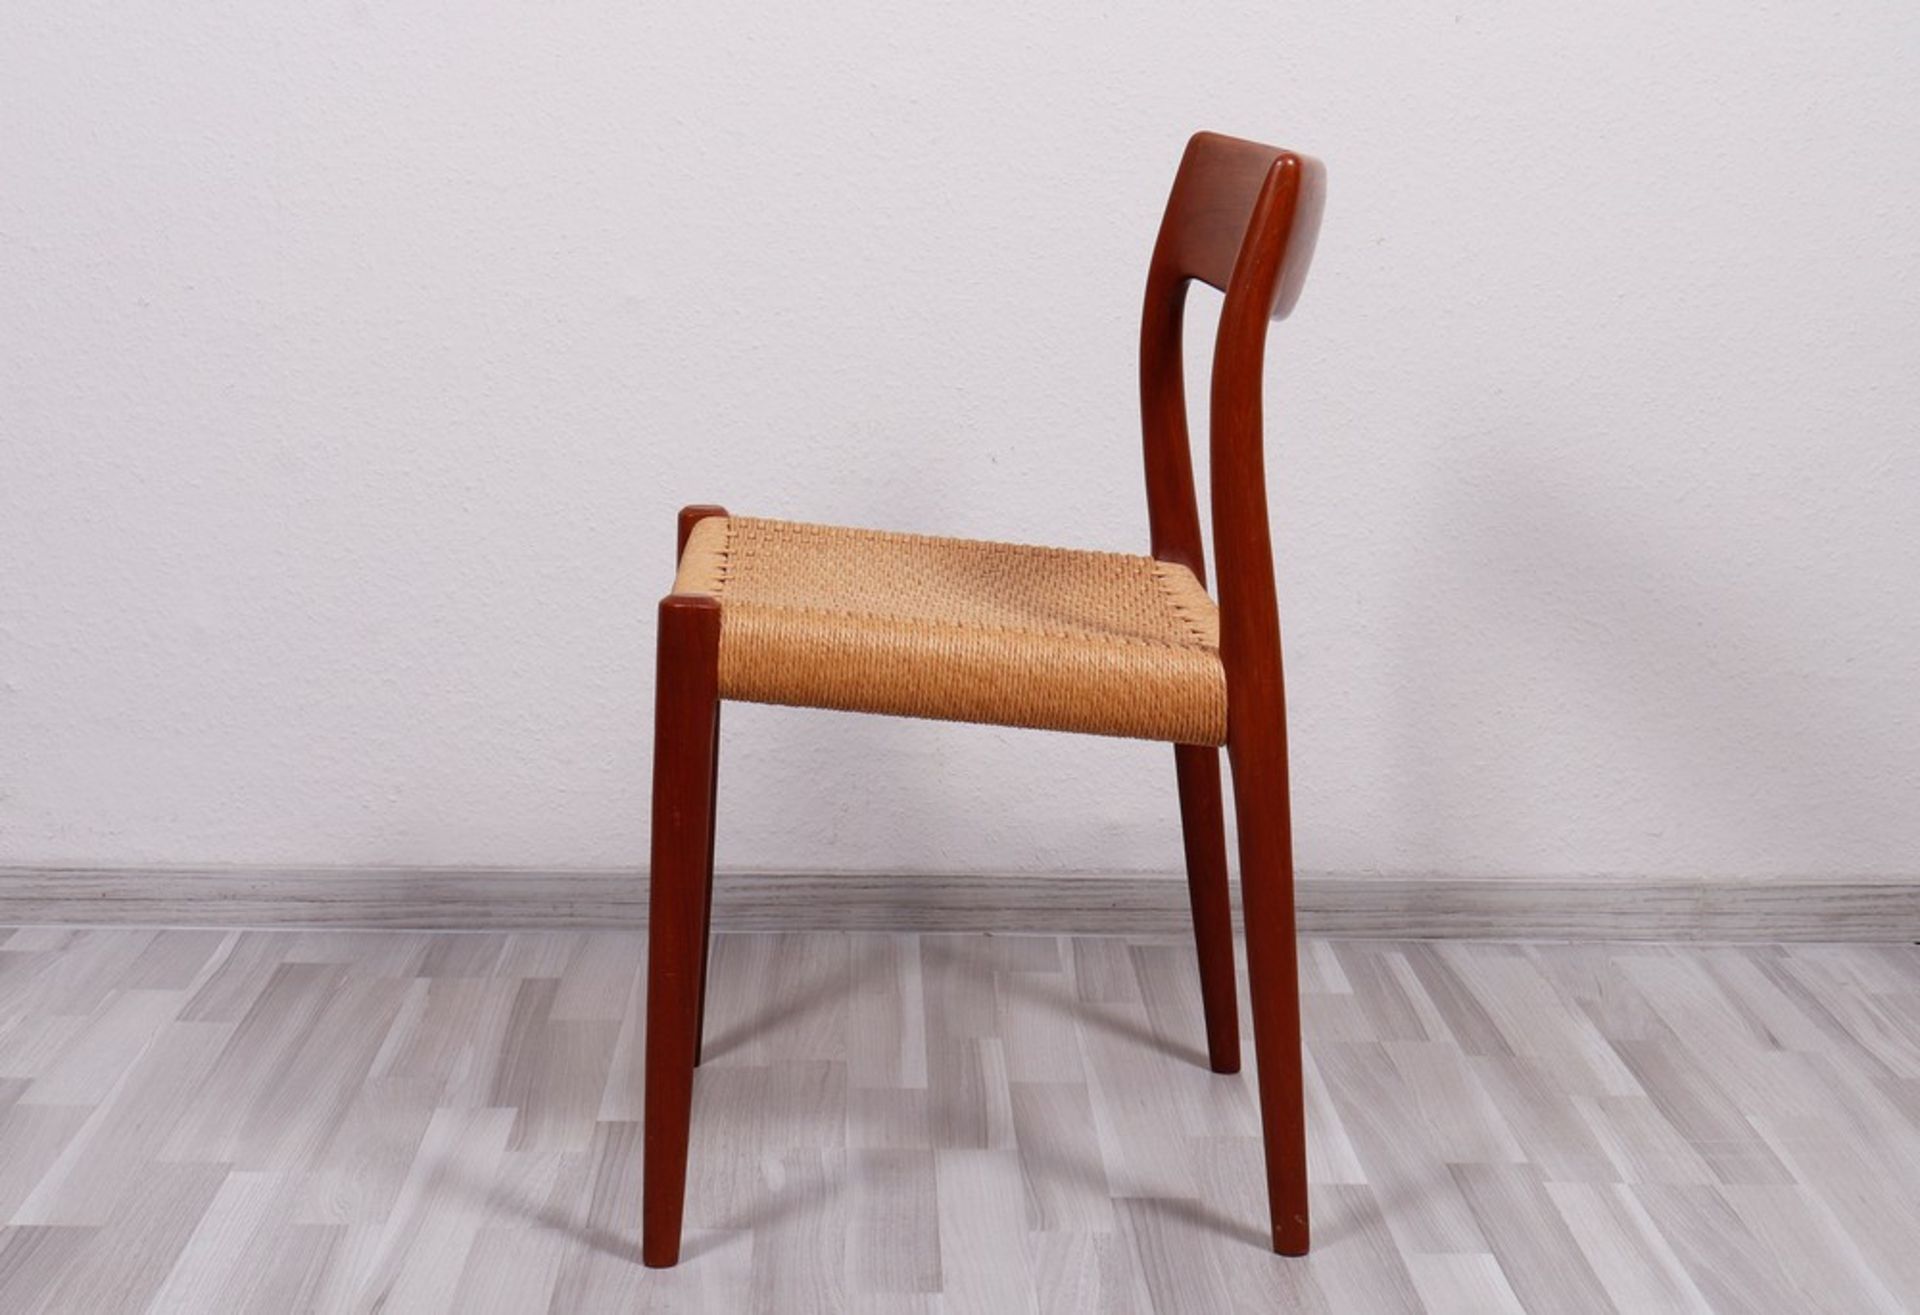 4 chairs, Niels Otto Möller, Denmark, c. 1960 - Image 4 of 4